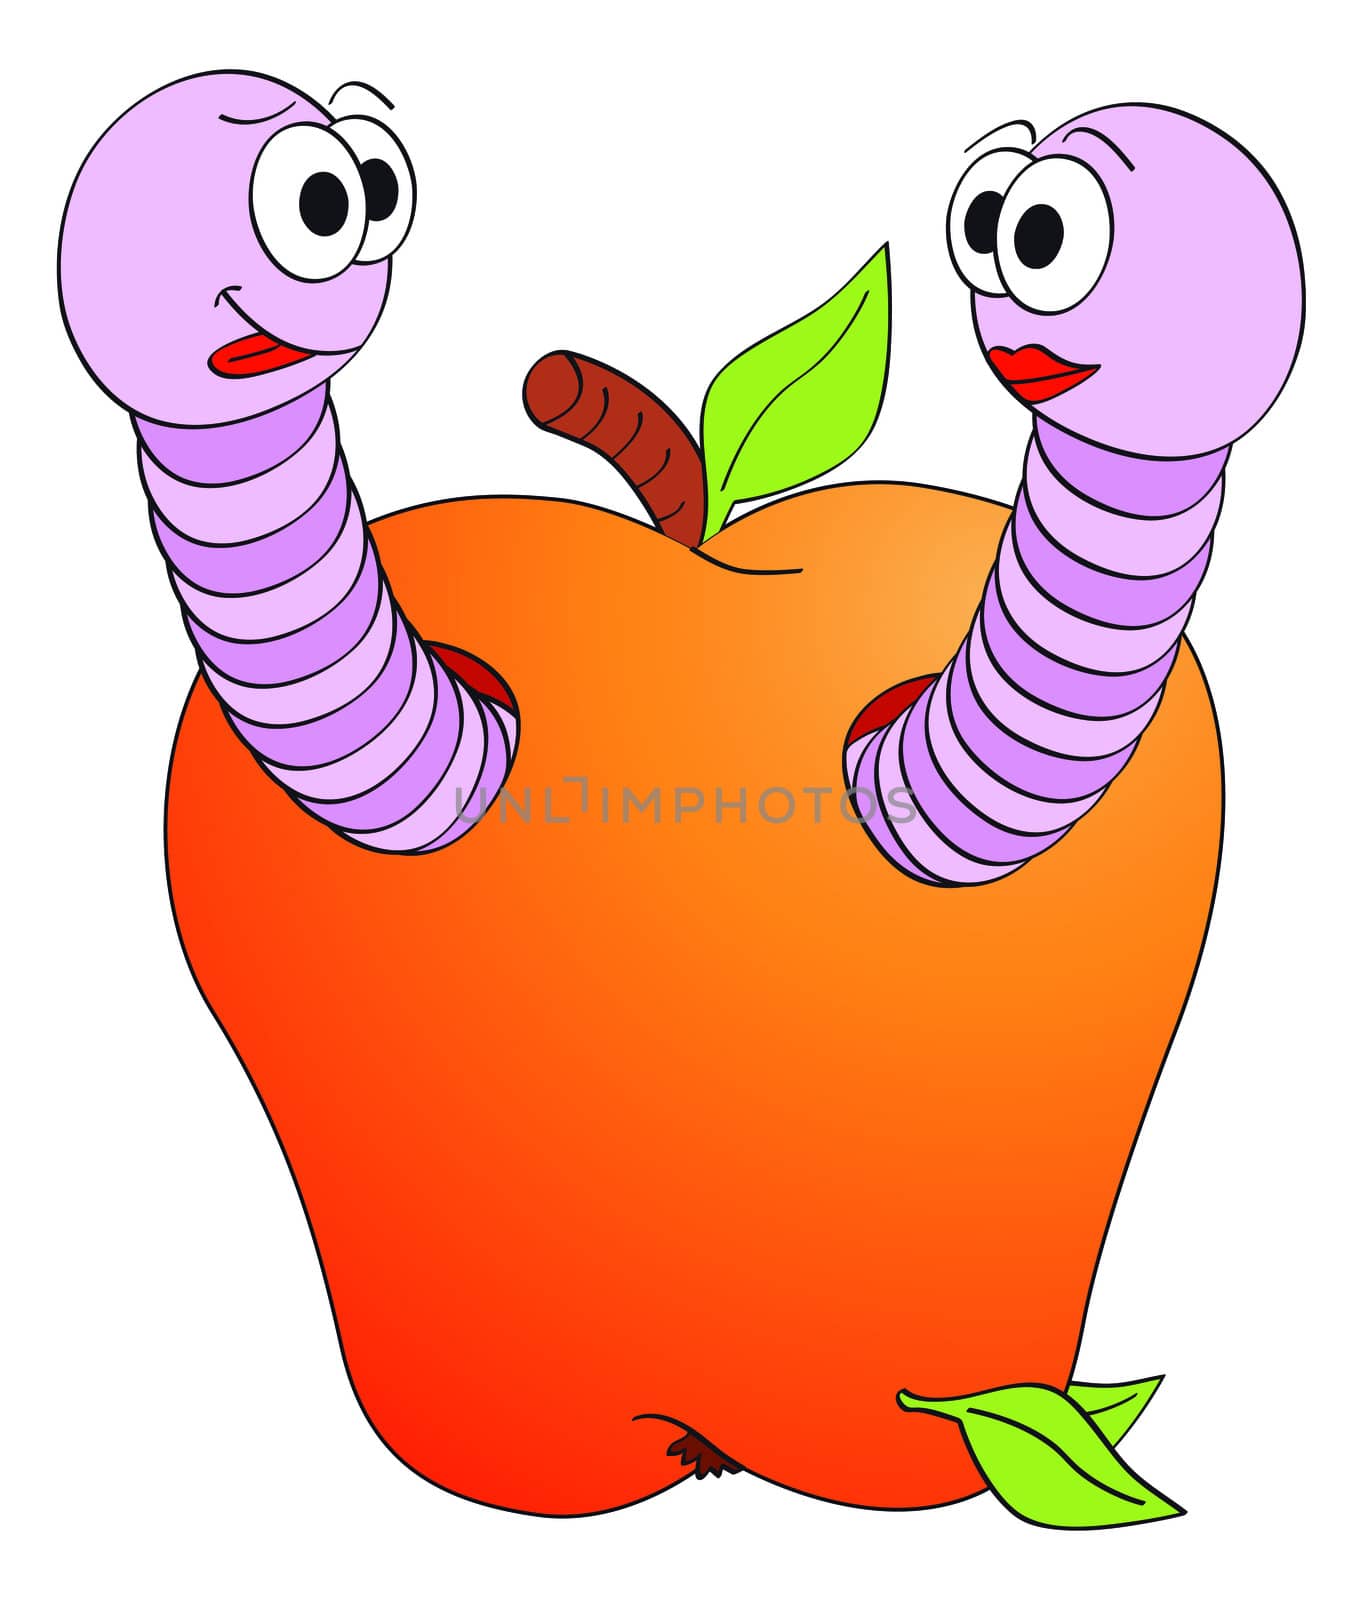 Cartoon smiling worms character in apple illustration isolated on white background by vermicule